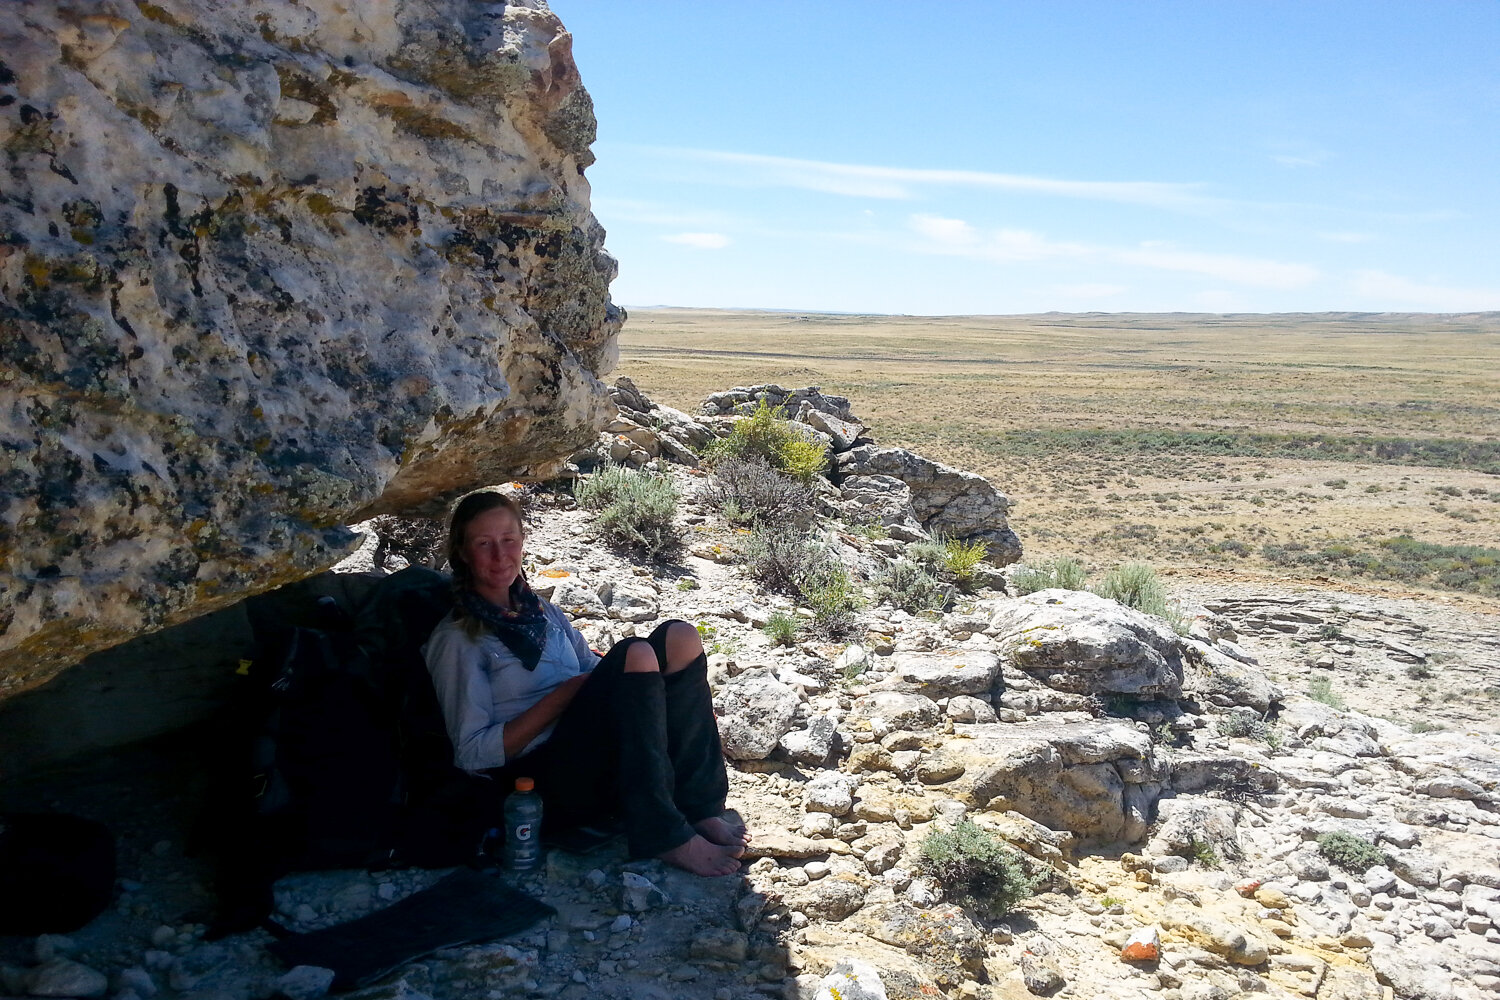 Sitting in the shade of a large boulder to be the mid-afternoon Heat in Wyoming